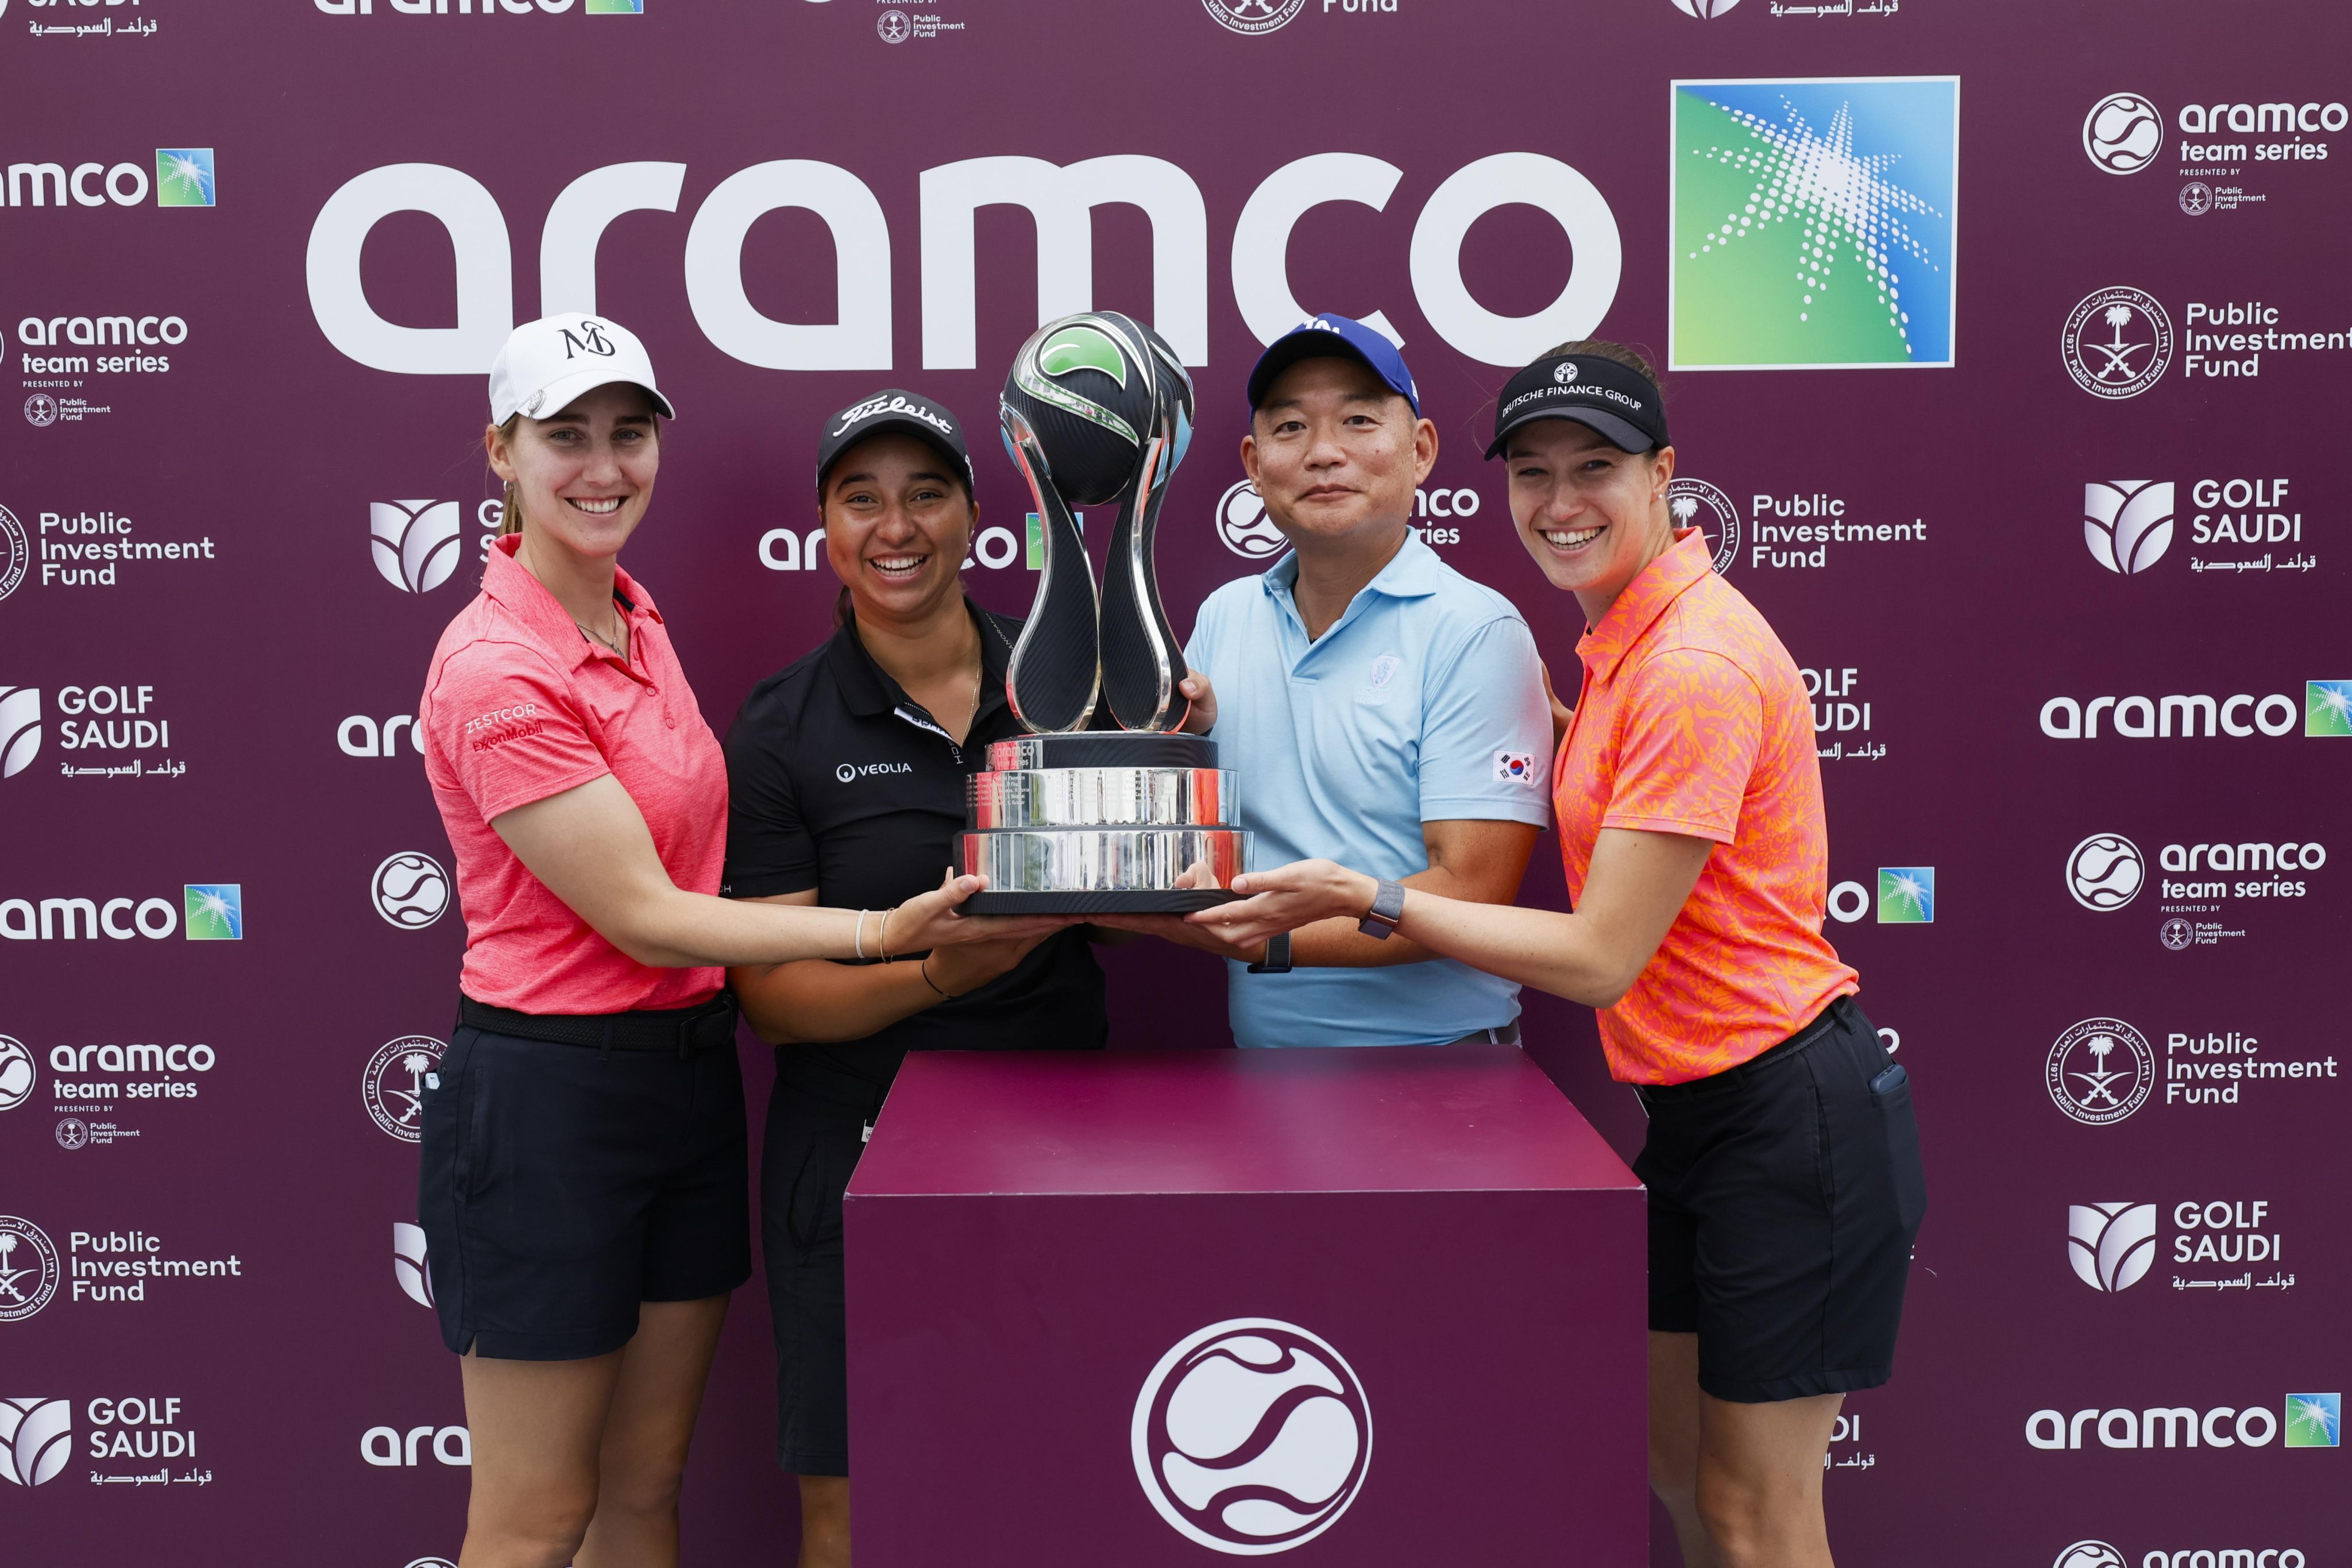 Aramco Team Series Hong Kong winners Team Napoleaova (from left to right) Magdalena Simmermacher, team captain Kristyna Napoleaova, John Hyun and Laura Fuenfstueck. Photo: Aramco Team Series